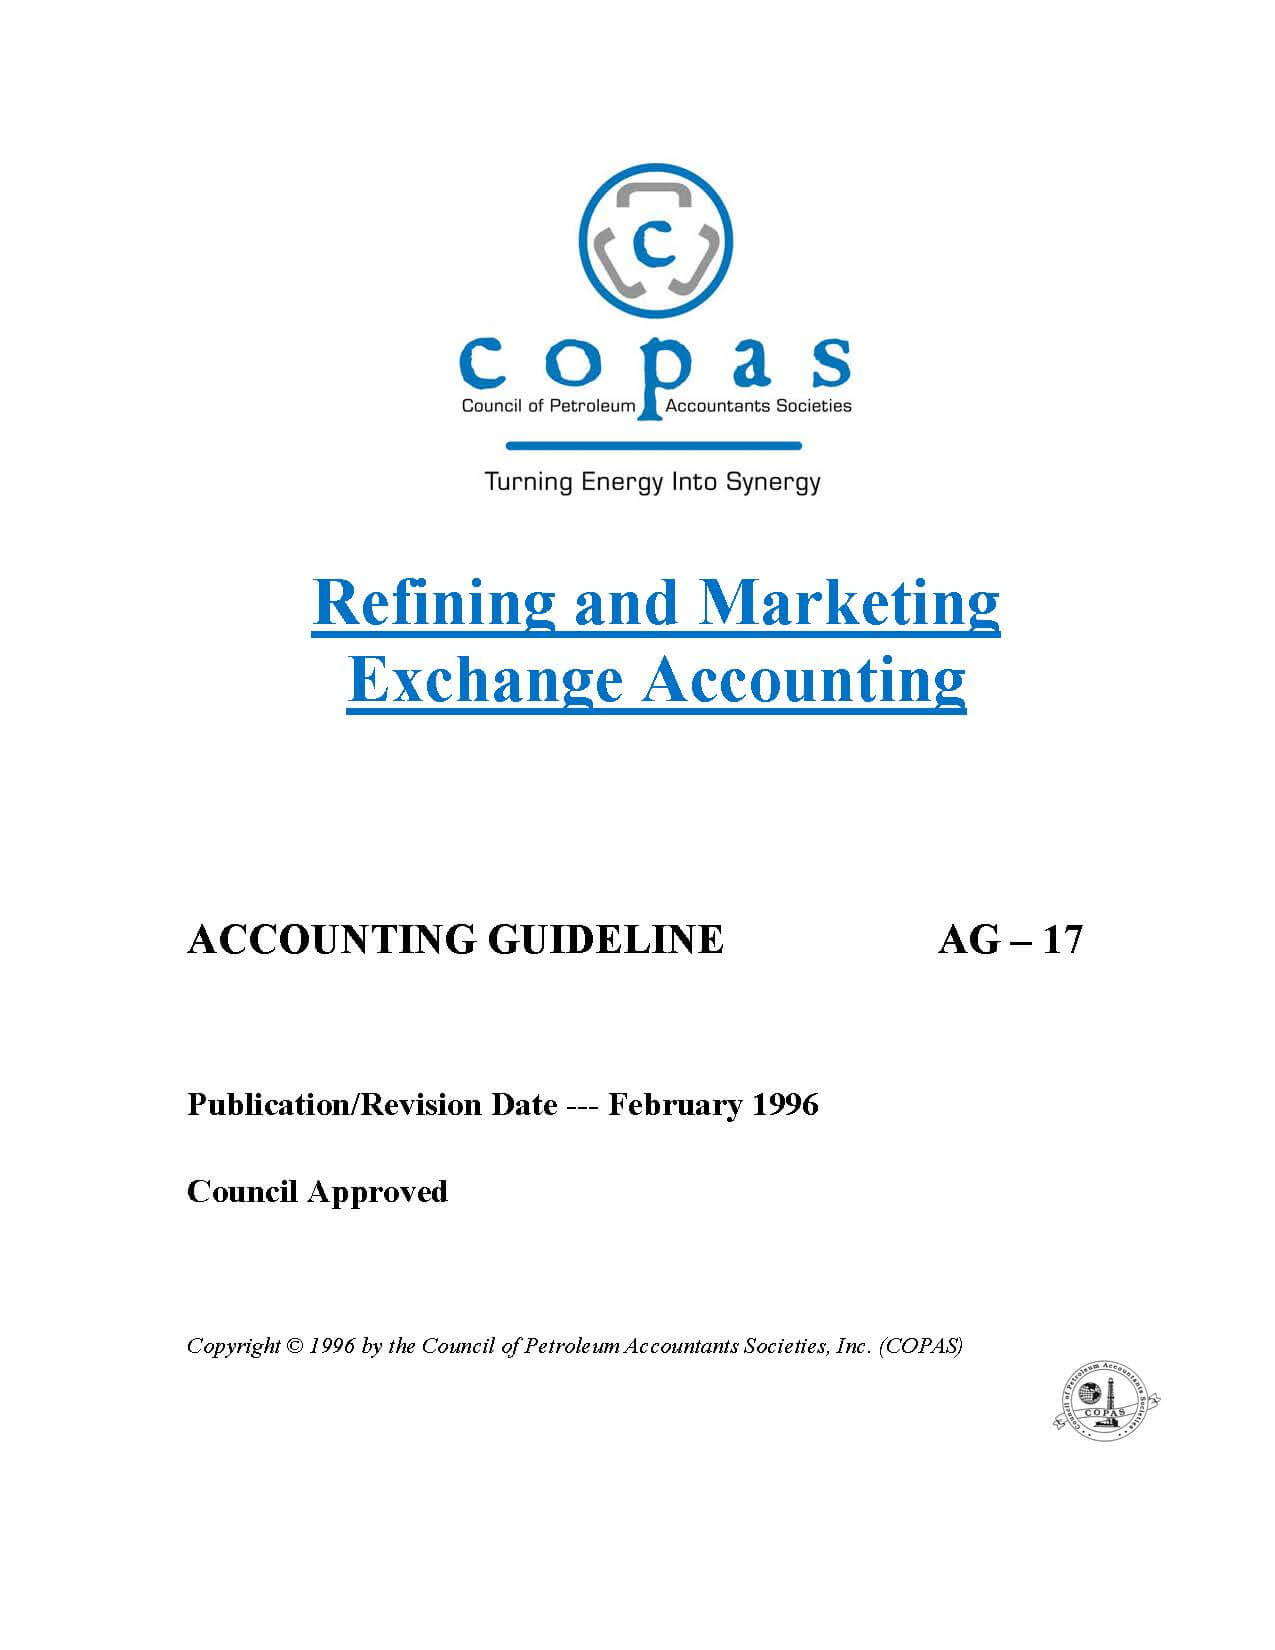 AG-17 Refining And Marketing Exchange Accounting